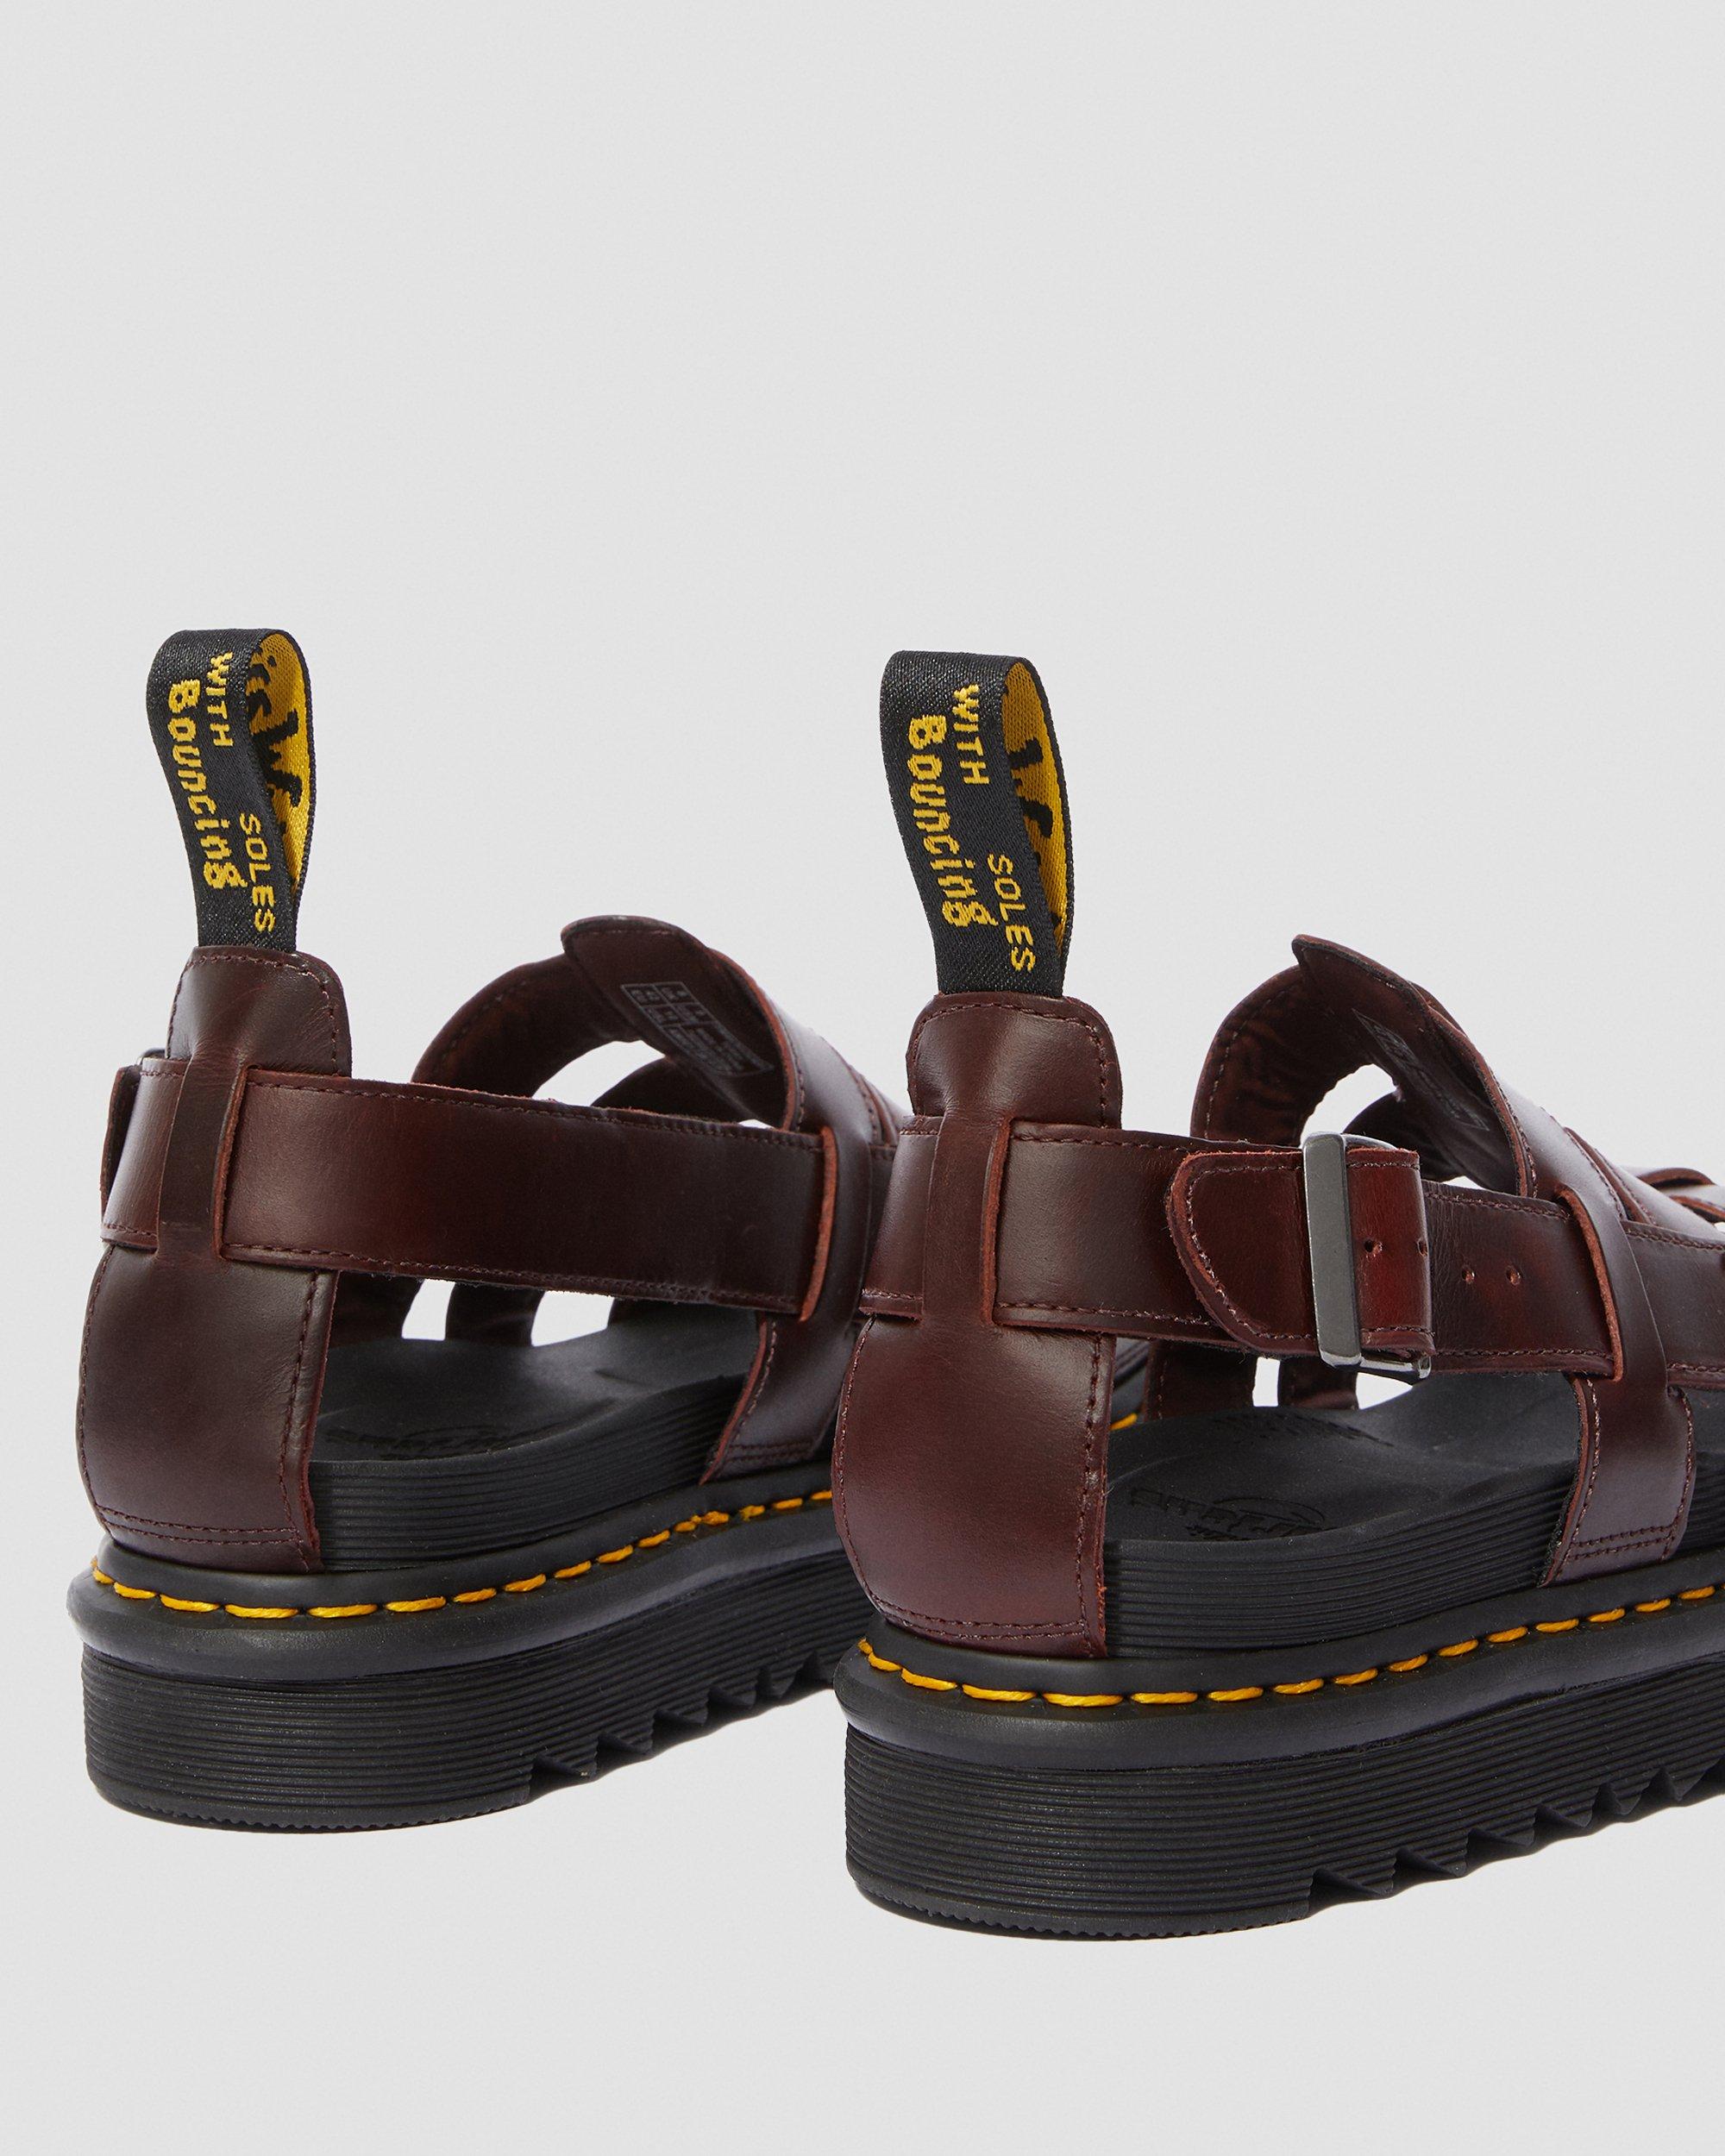 Terry Leather Strap Sandals Dr. Martens